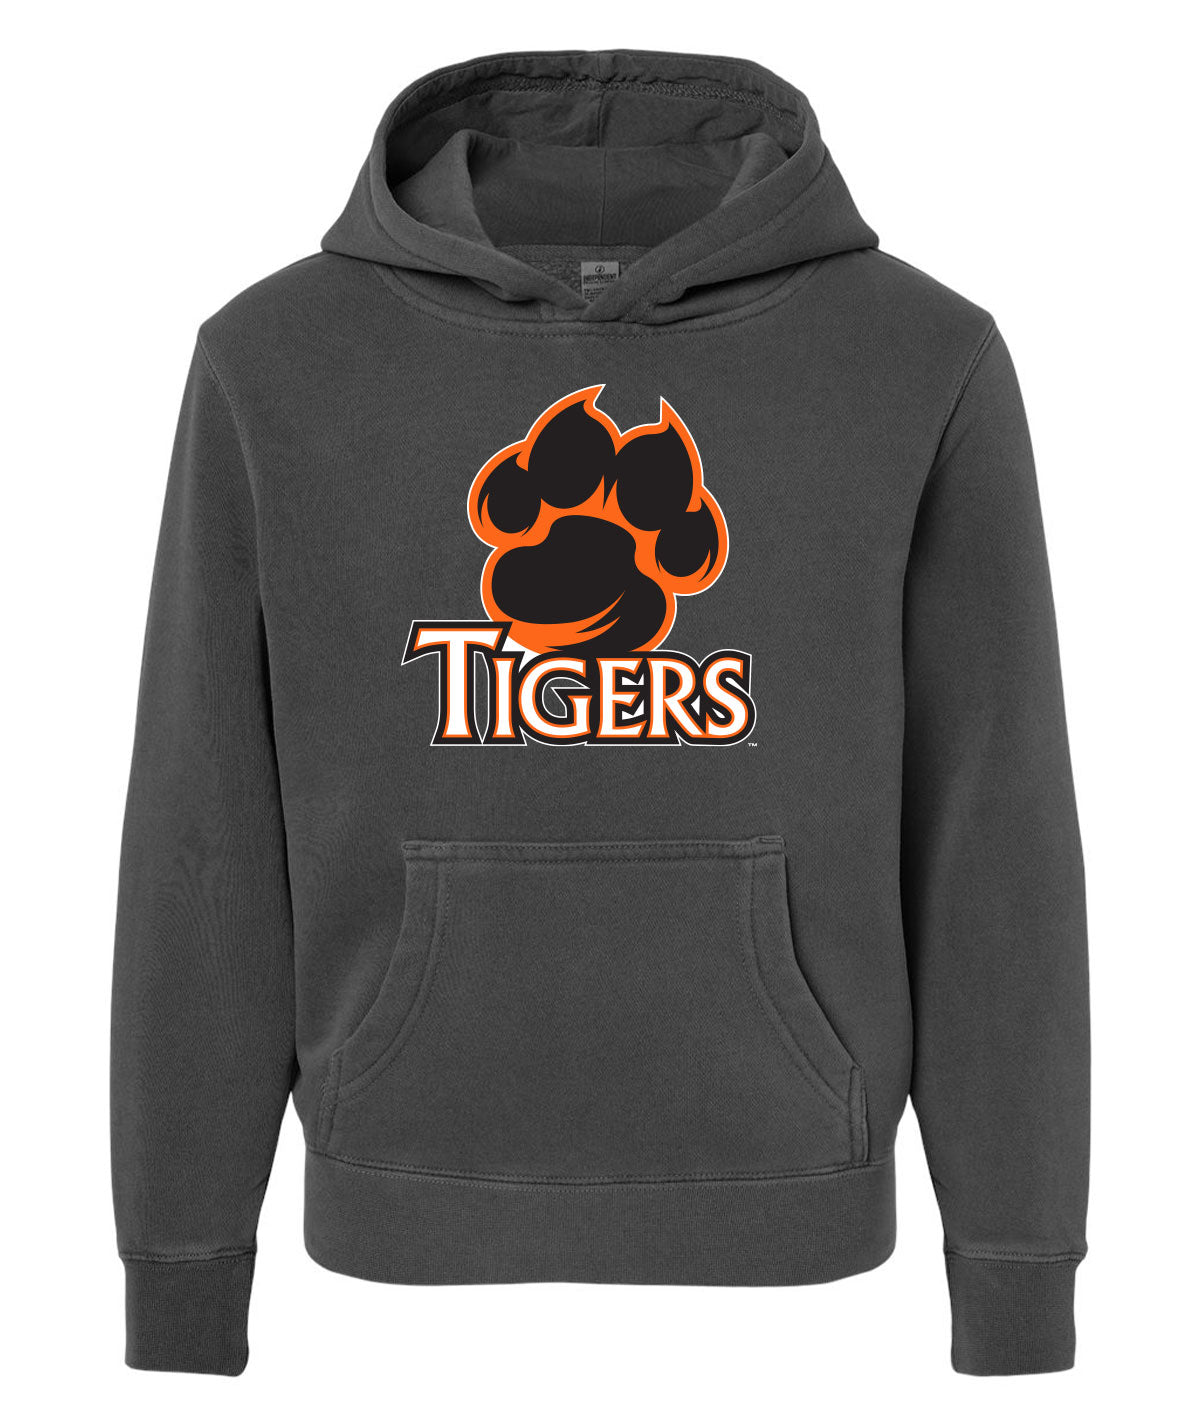 Tigers Youth Slouch Hooded Sweatshirt